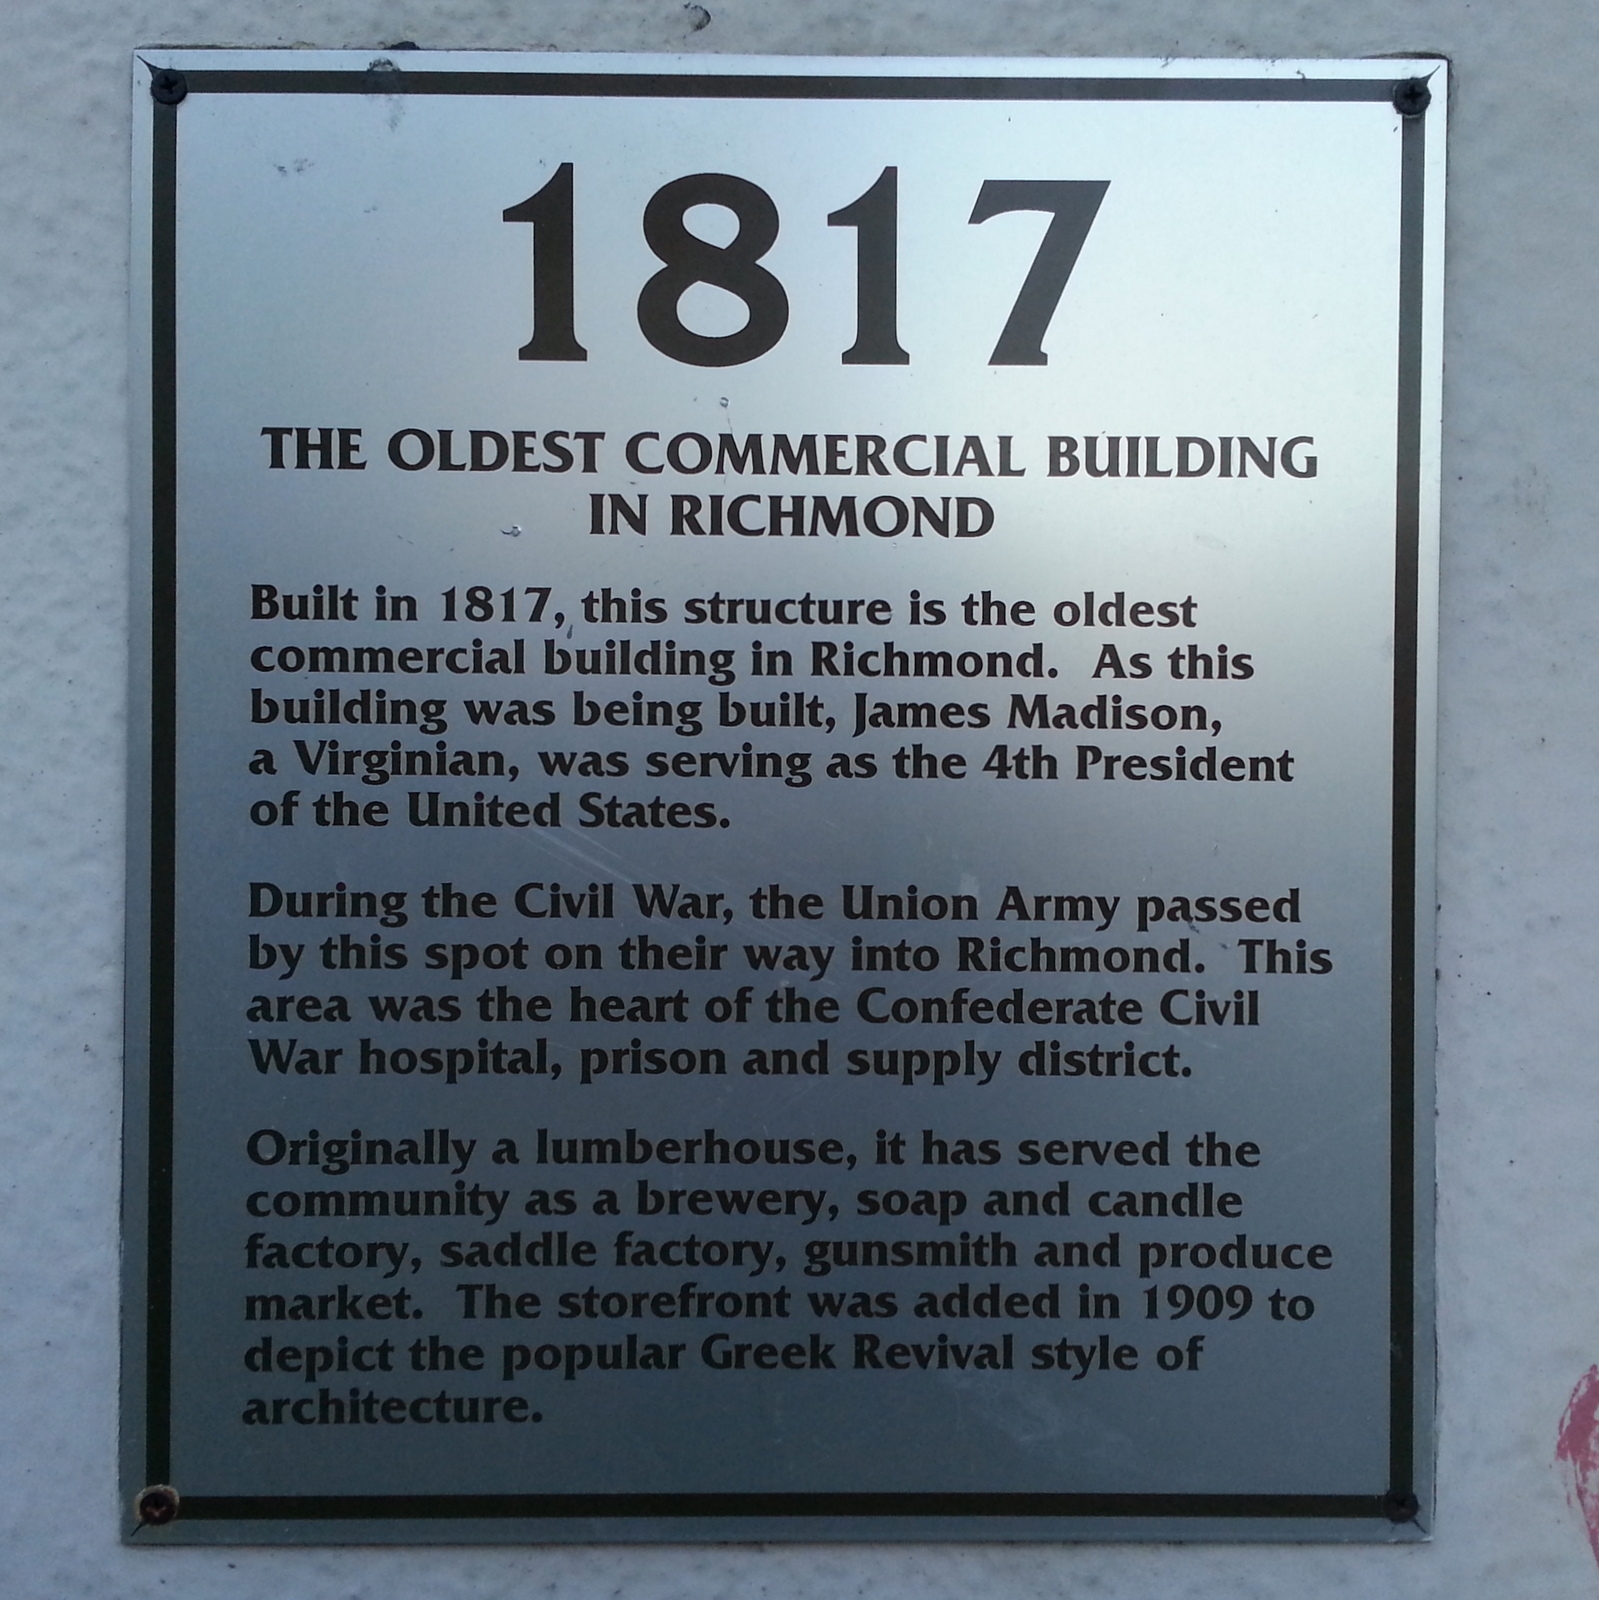 The Oldest Commercial Building in Richmond Marker